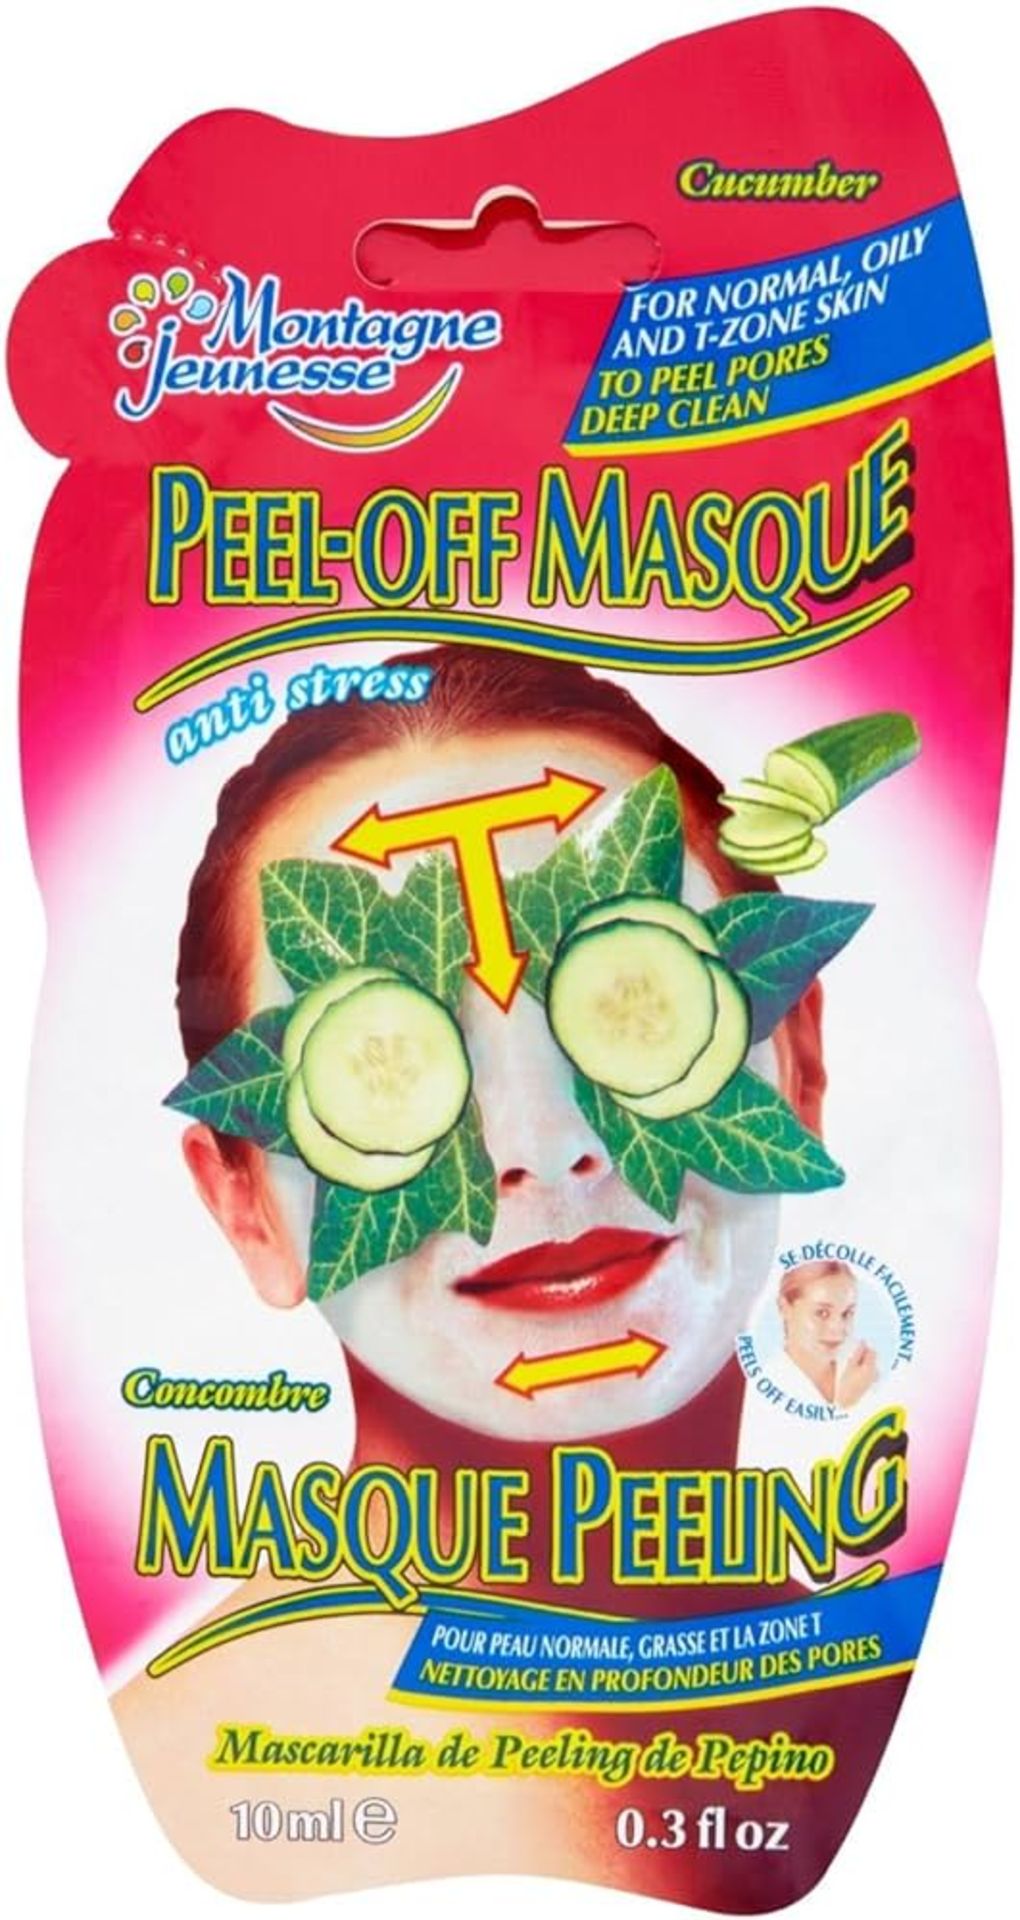 Bulk Trade Lot 2,000 x Montagne Jeunesse Face Masks. RRPs Vary from £2.50 - £6. This lot has a RRP - Image 16 of 16